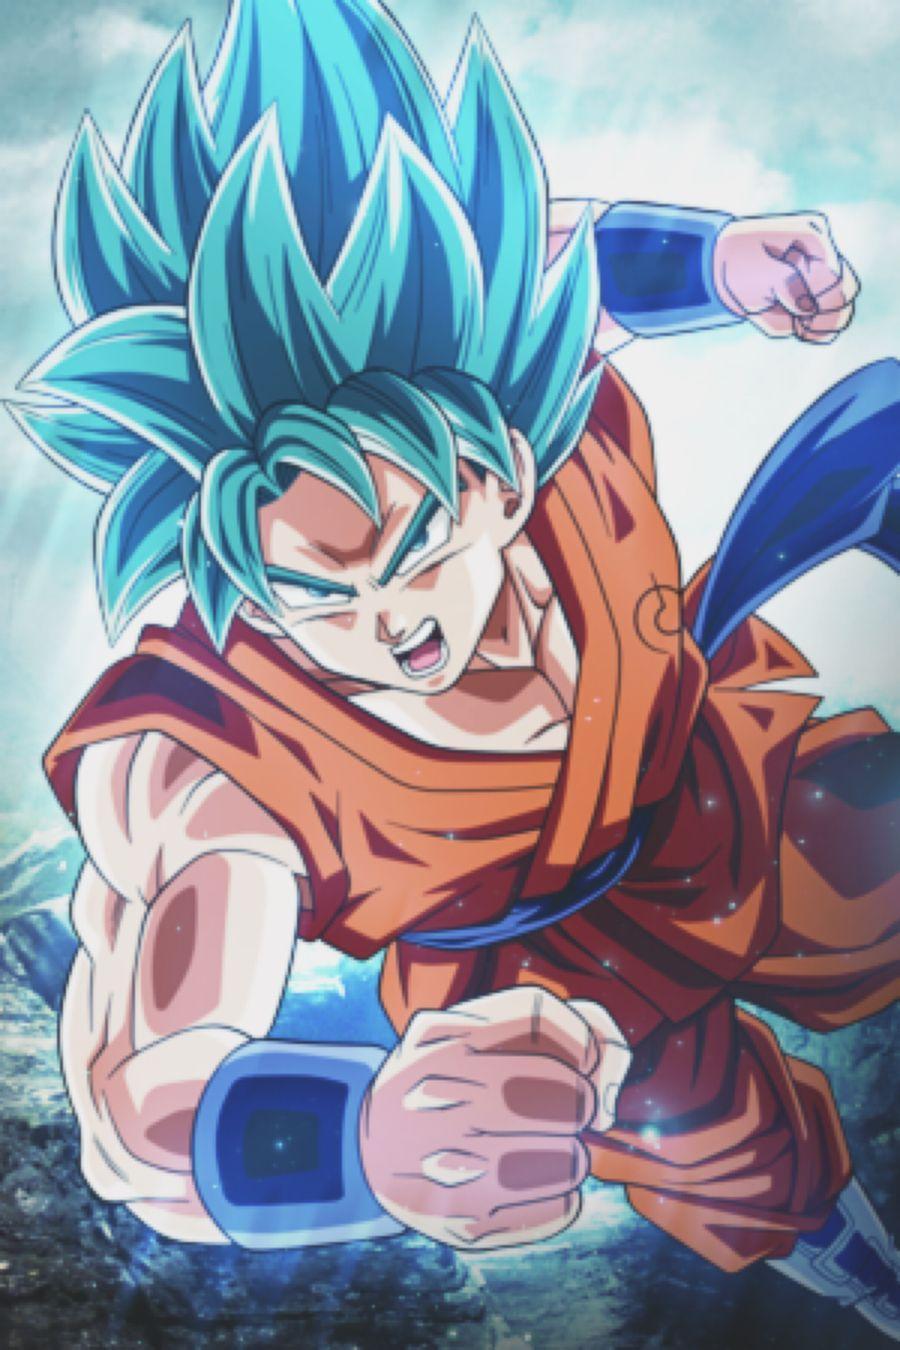 Vegito Blue! Dragon Ball Super IPhone Wallpapers for your enjoyment